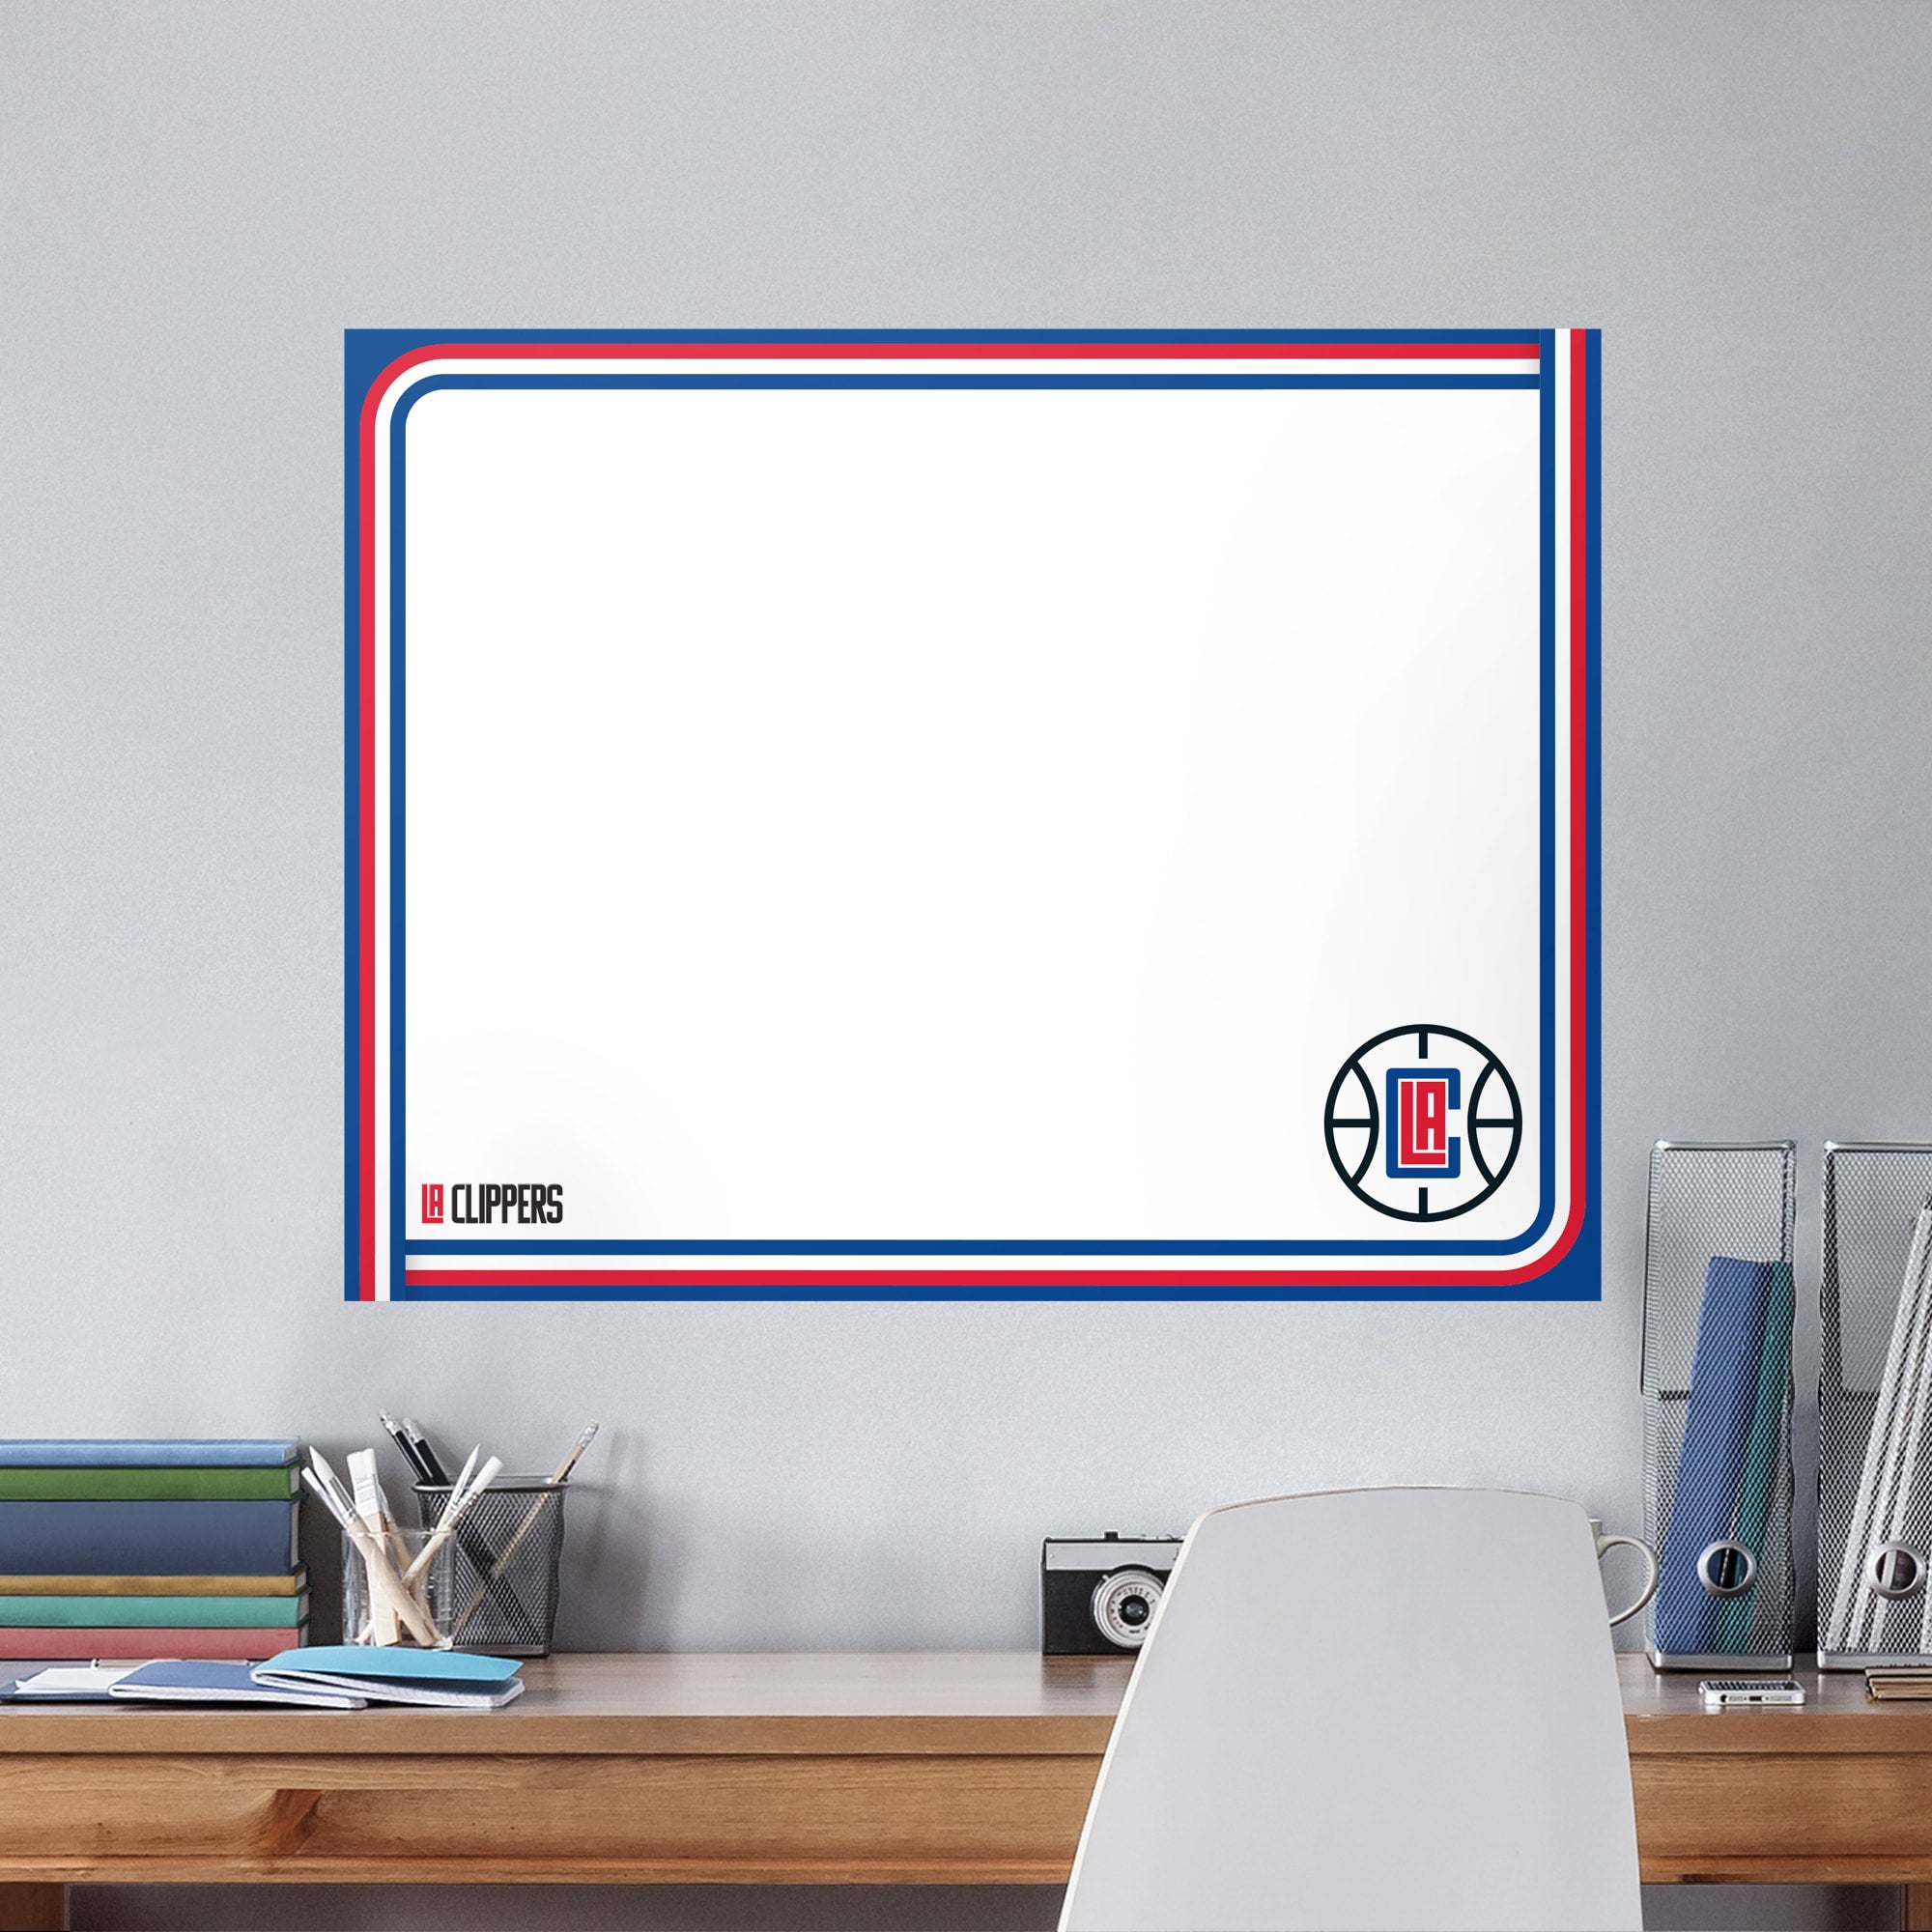 Los Angeles Clippers for Los Angeles Clippers: Dry Erase Whiteboard - Officially Licensed NBA Removable Wall Decal XL by Fathead